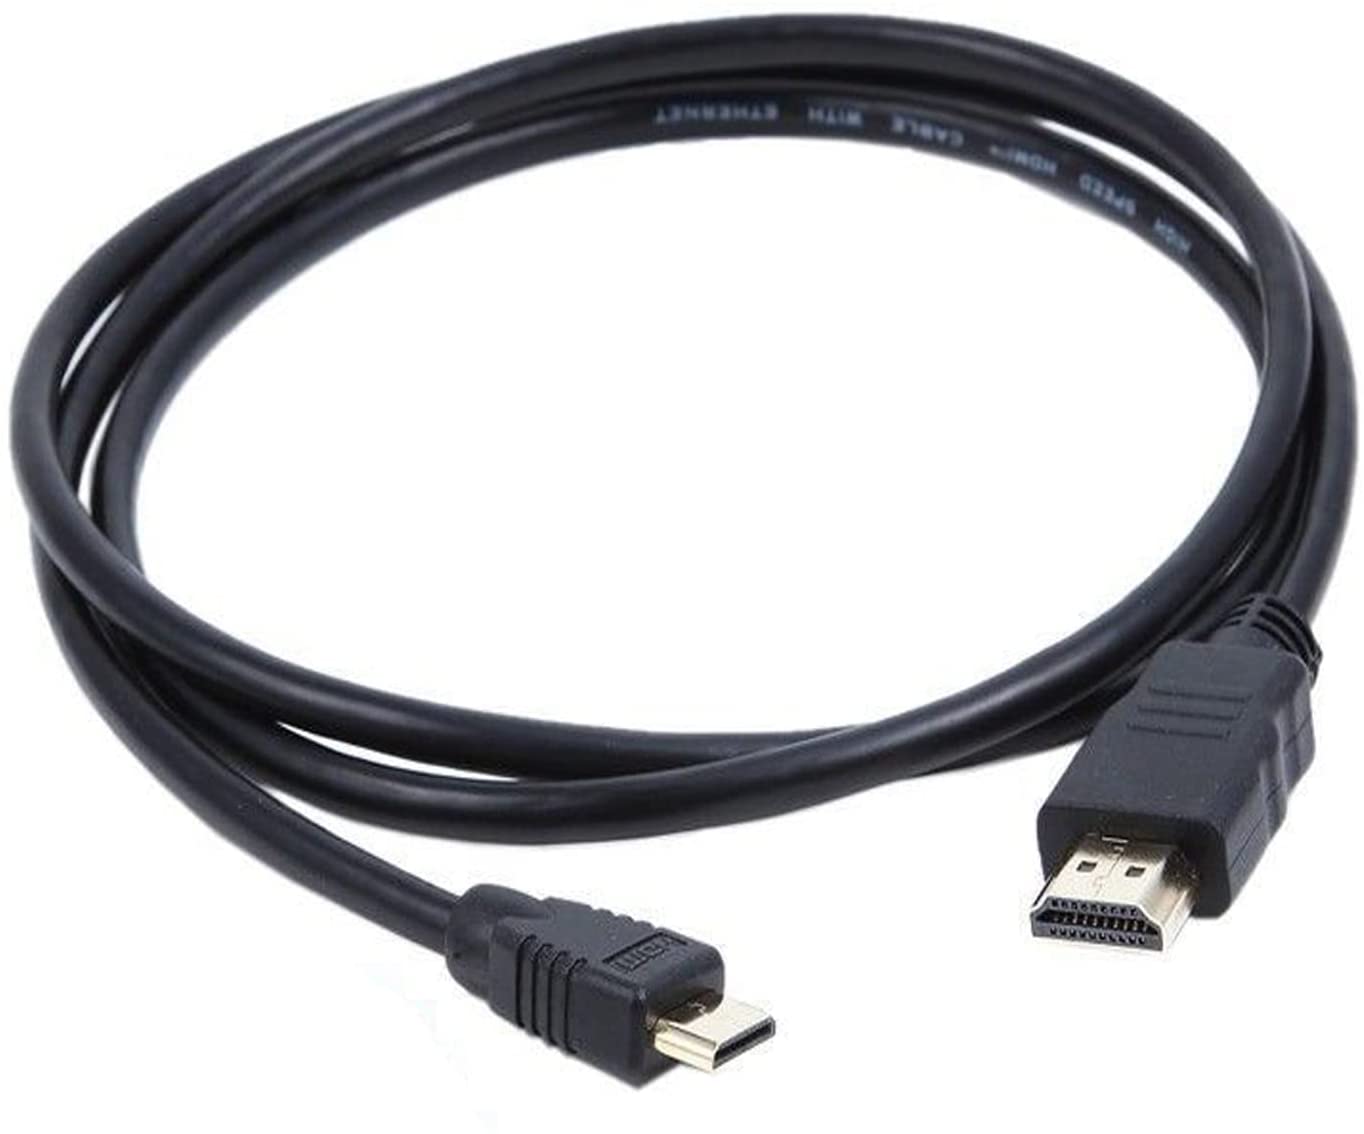 UPBRIGHT New Mini HDMI Cable Audio Video AV to HD TV HDTV Cord For Aluratek AT107F 7" WIFI Android Tablet PC - image 2 of 5